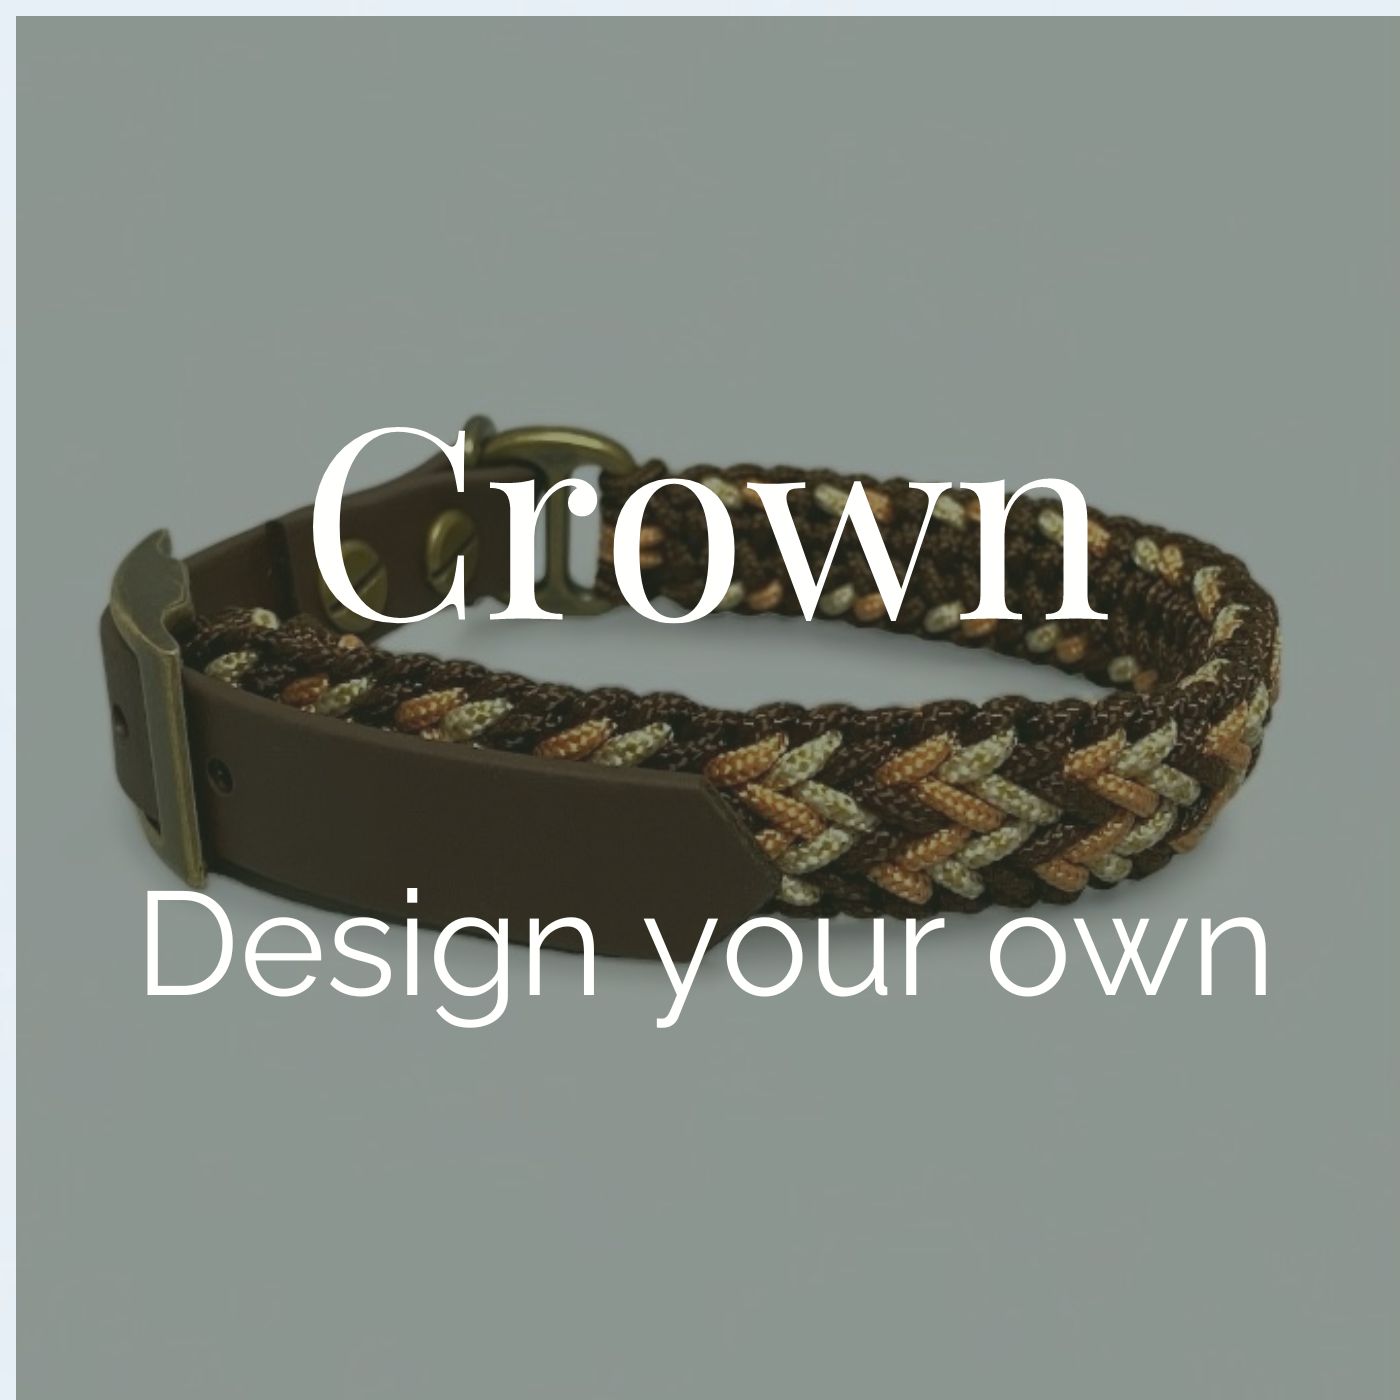 Crown - Design your own - Small Dog Collar